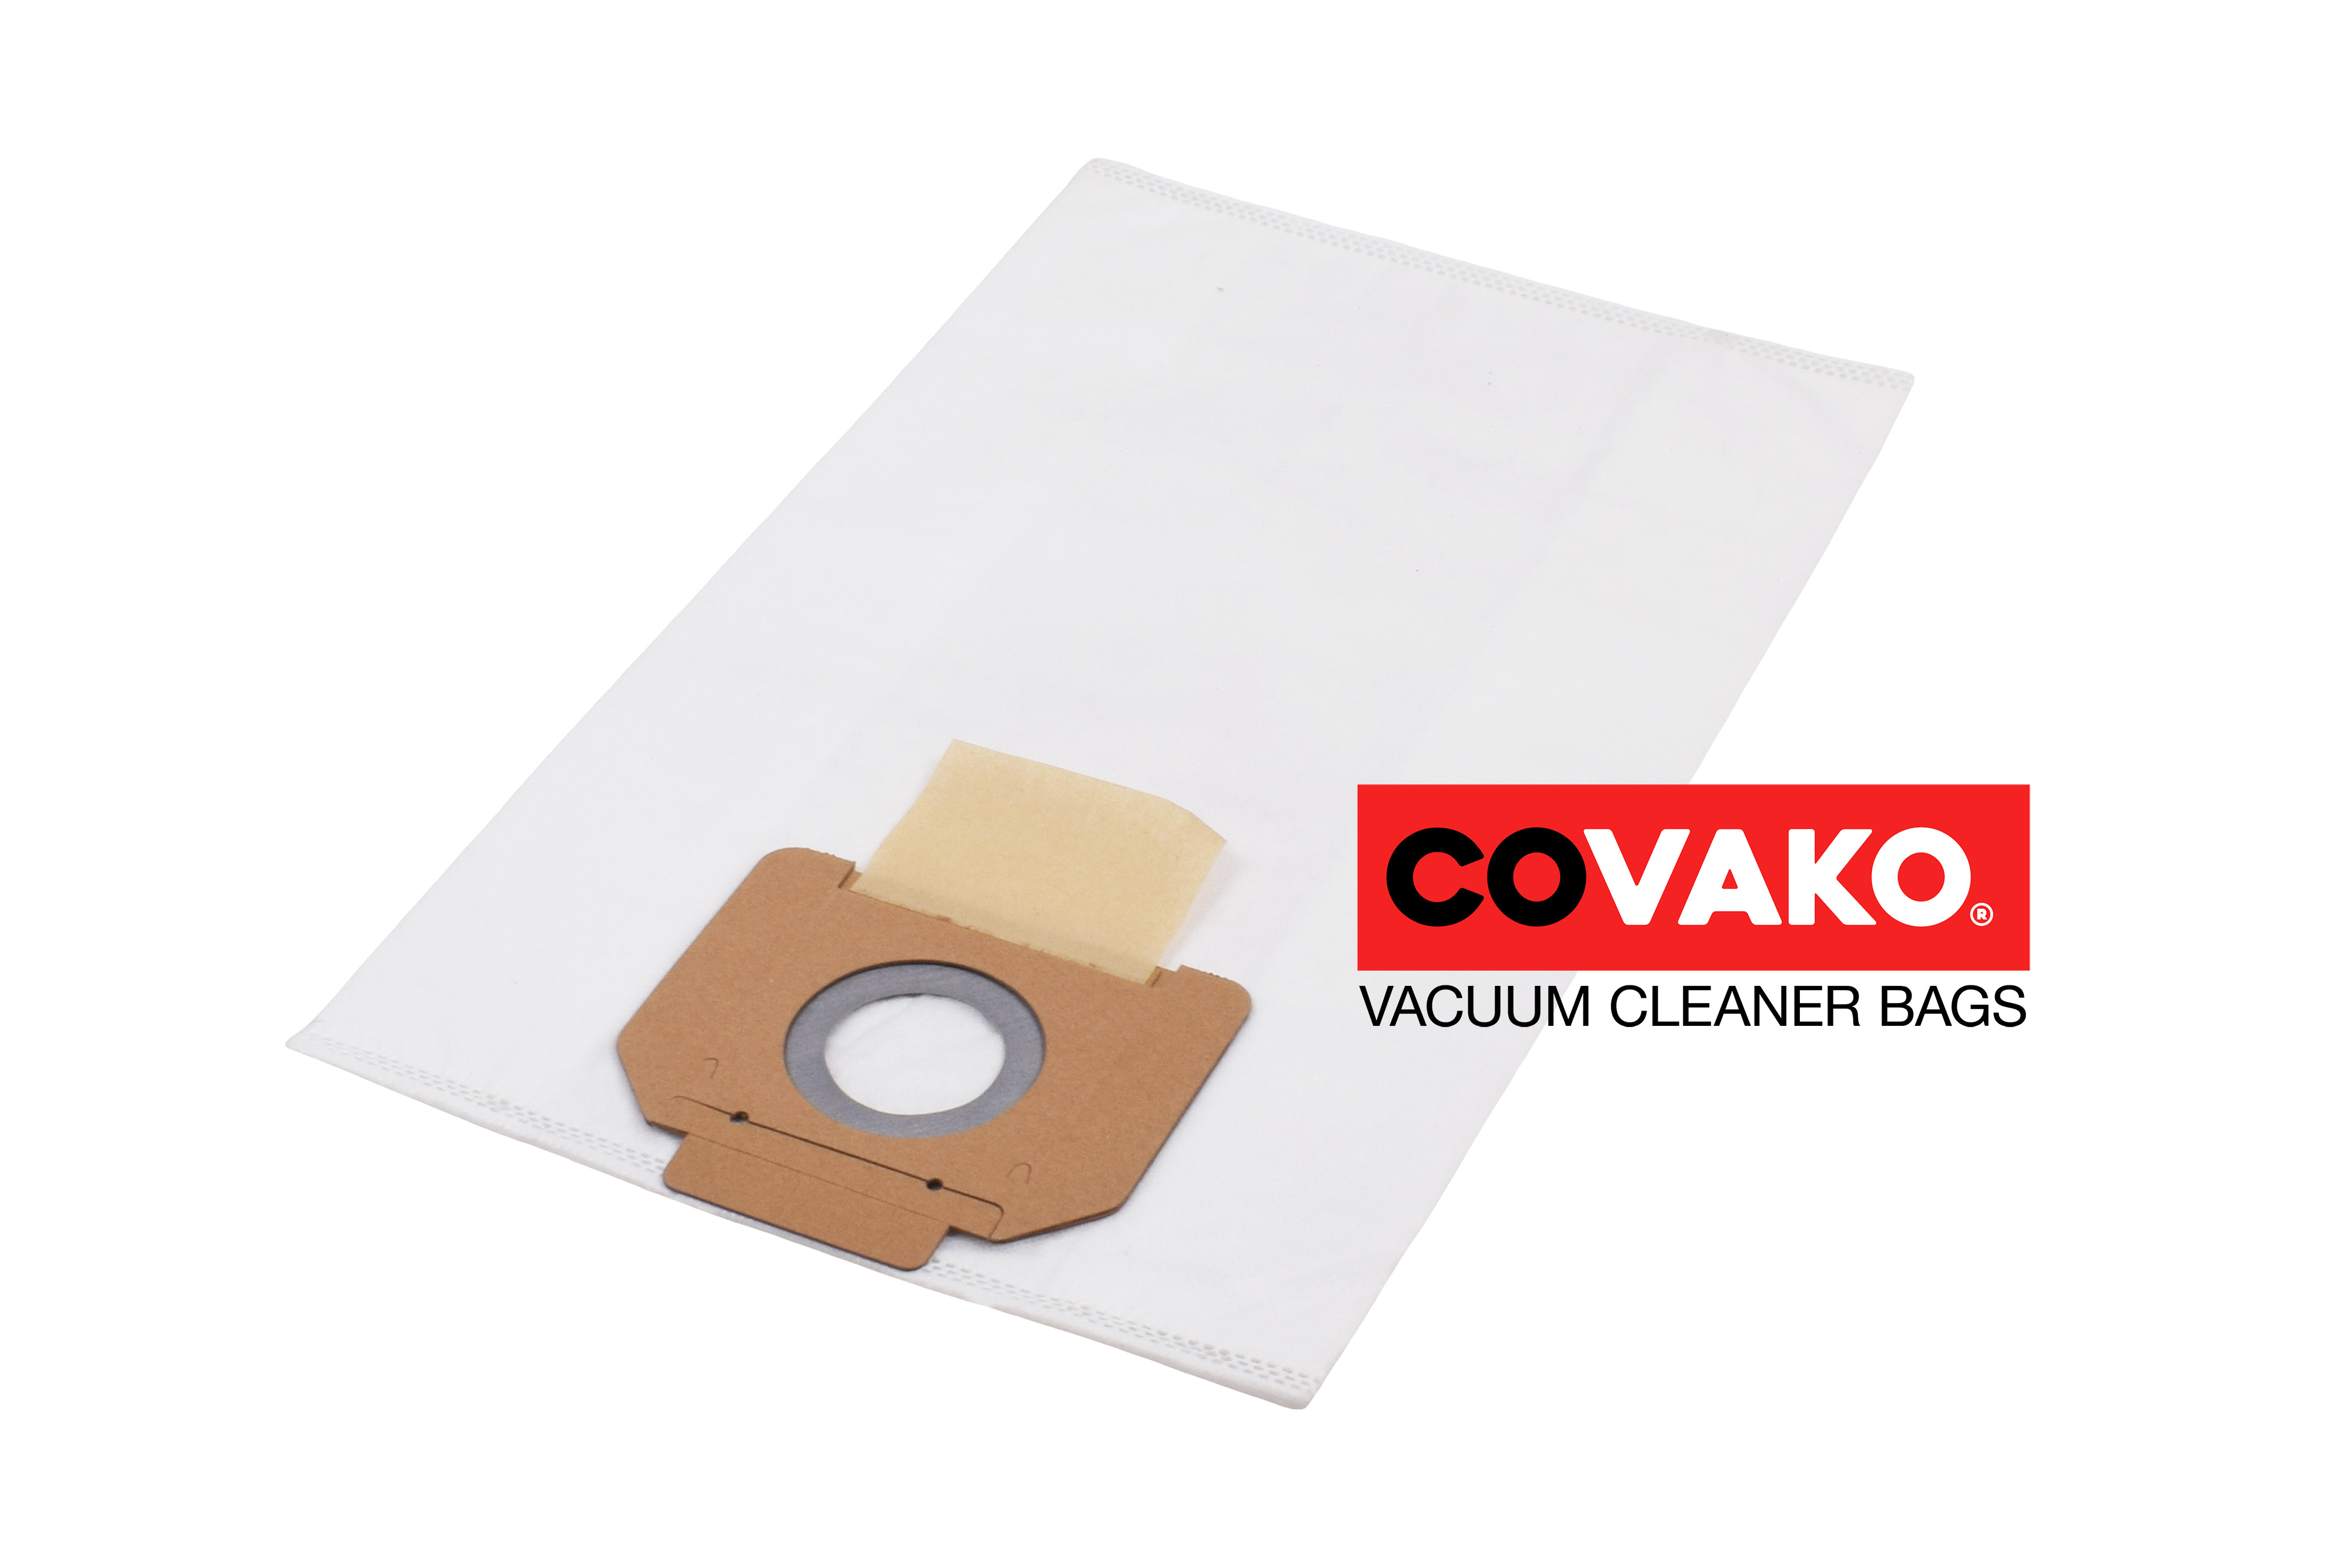 ICA GP 1/16 W&D / Synthesis - ICA vacuum cleaner bags